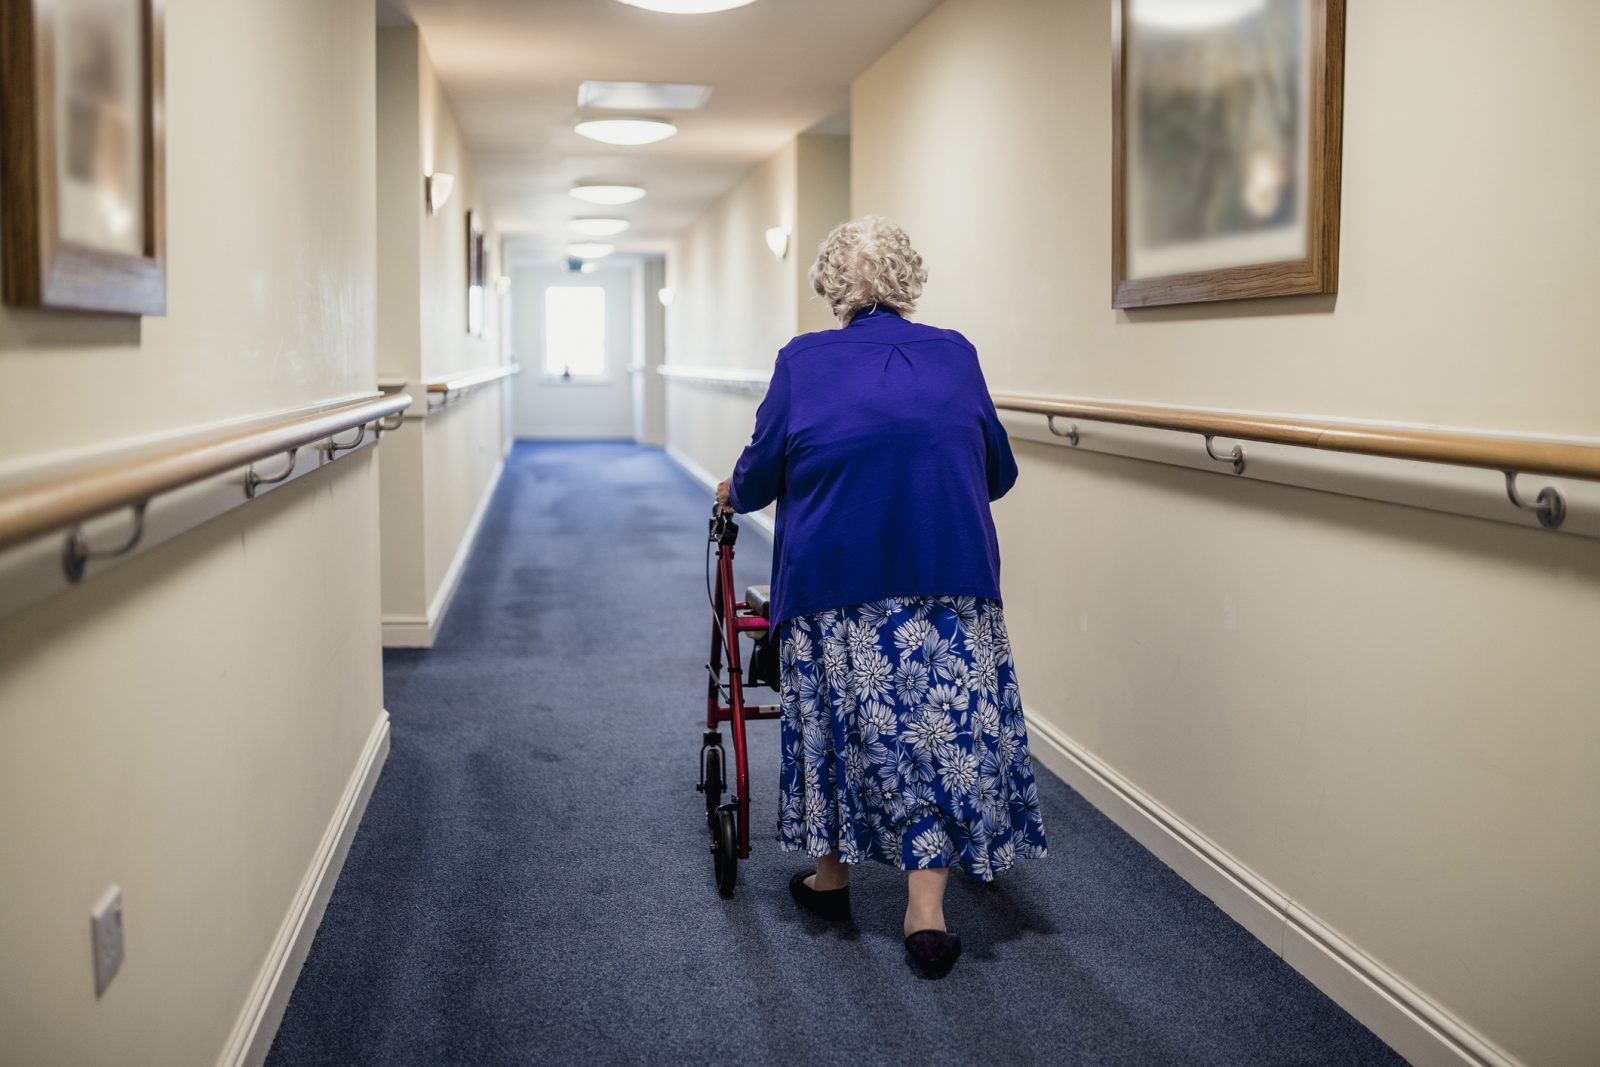 An older adult woman wearing a blue jacket and blue patterned skirt and using a red walker walks down a blue-carpeted hall in a long-term care facility; view from behind.